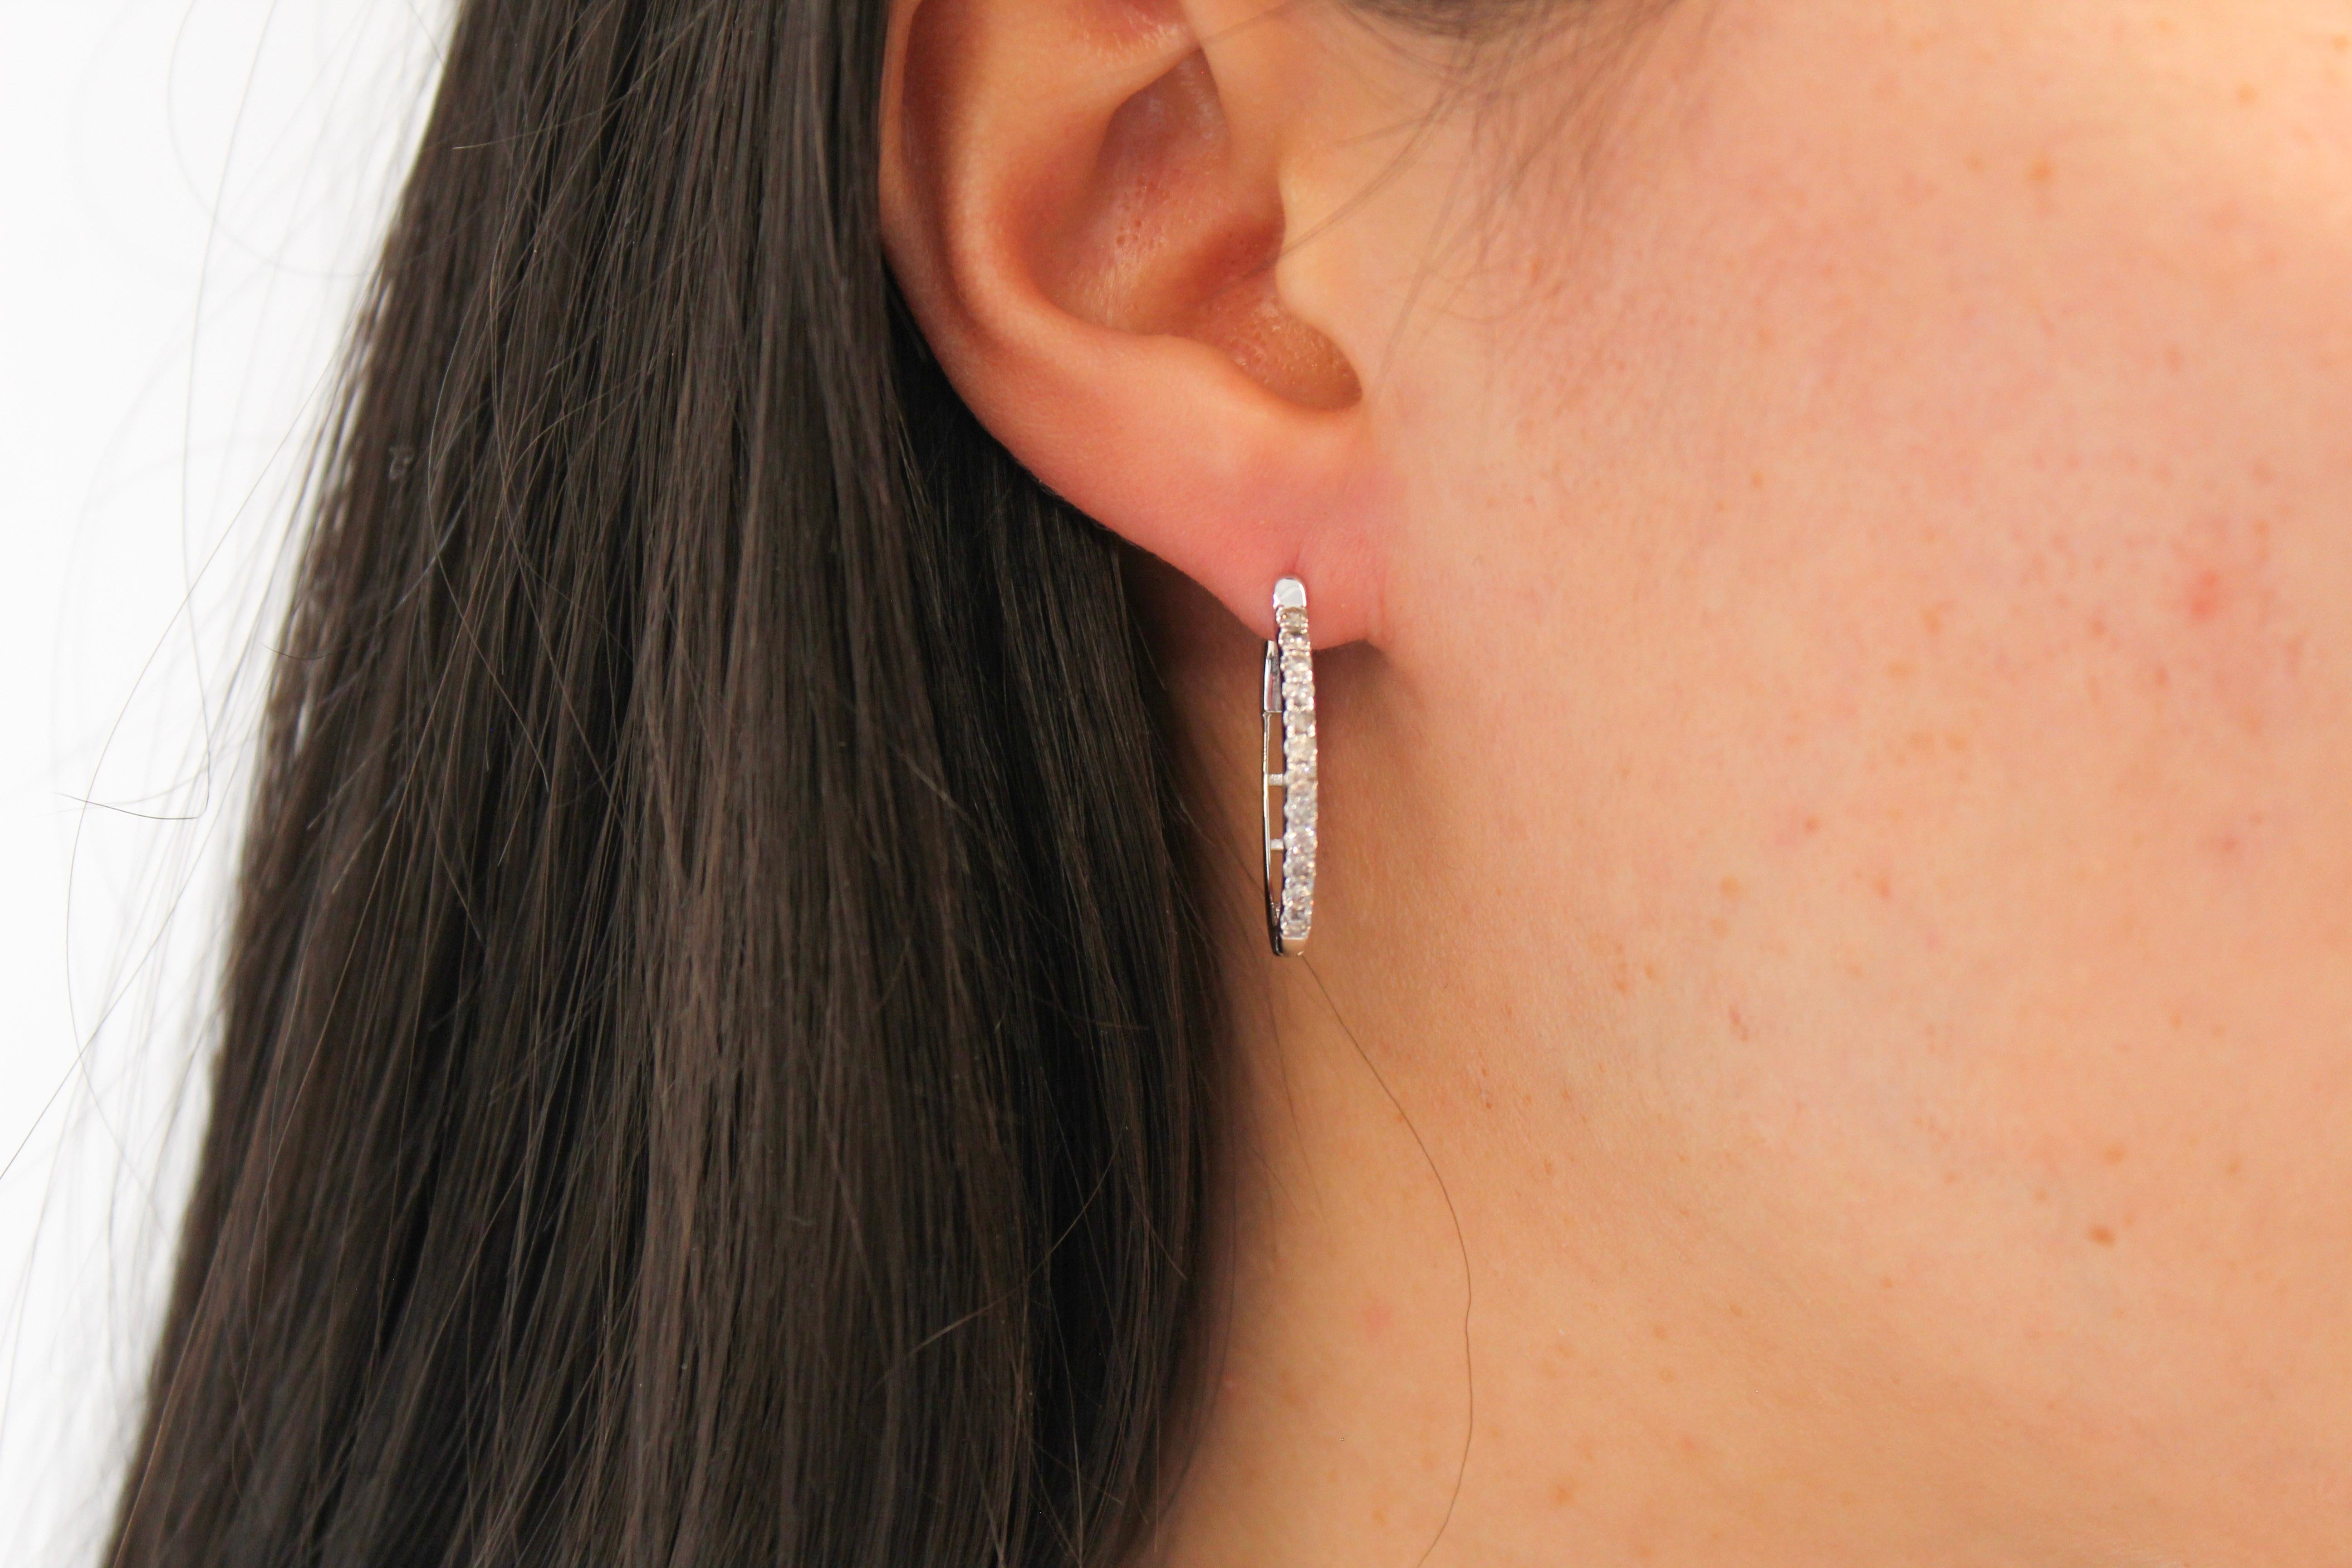 Nothing says luxury like an incredible pair of diamond oval hoop earrings. These stunning brightly polished 14 karat rose gold outside oval-shaped hoop earrings feature a total of 24 round brilliant cut diamonds totaling .50 carats are prong set on